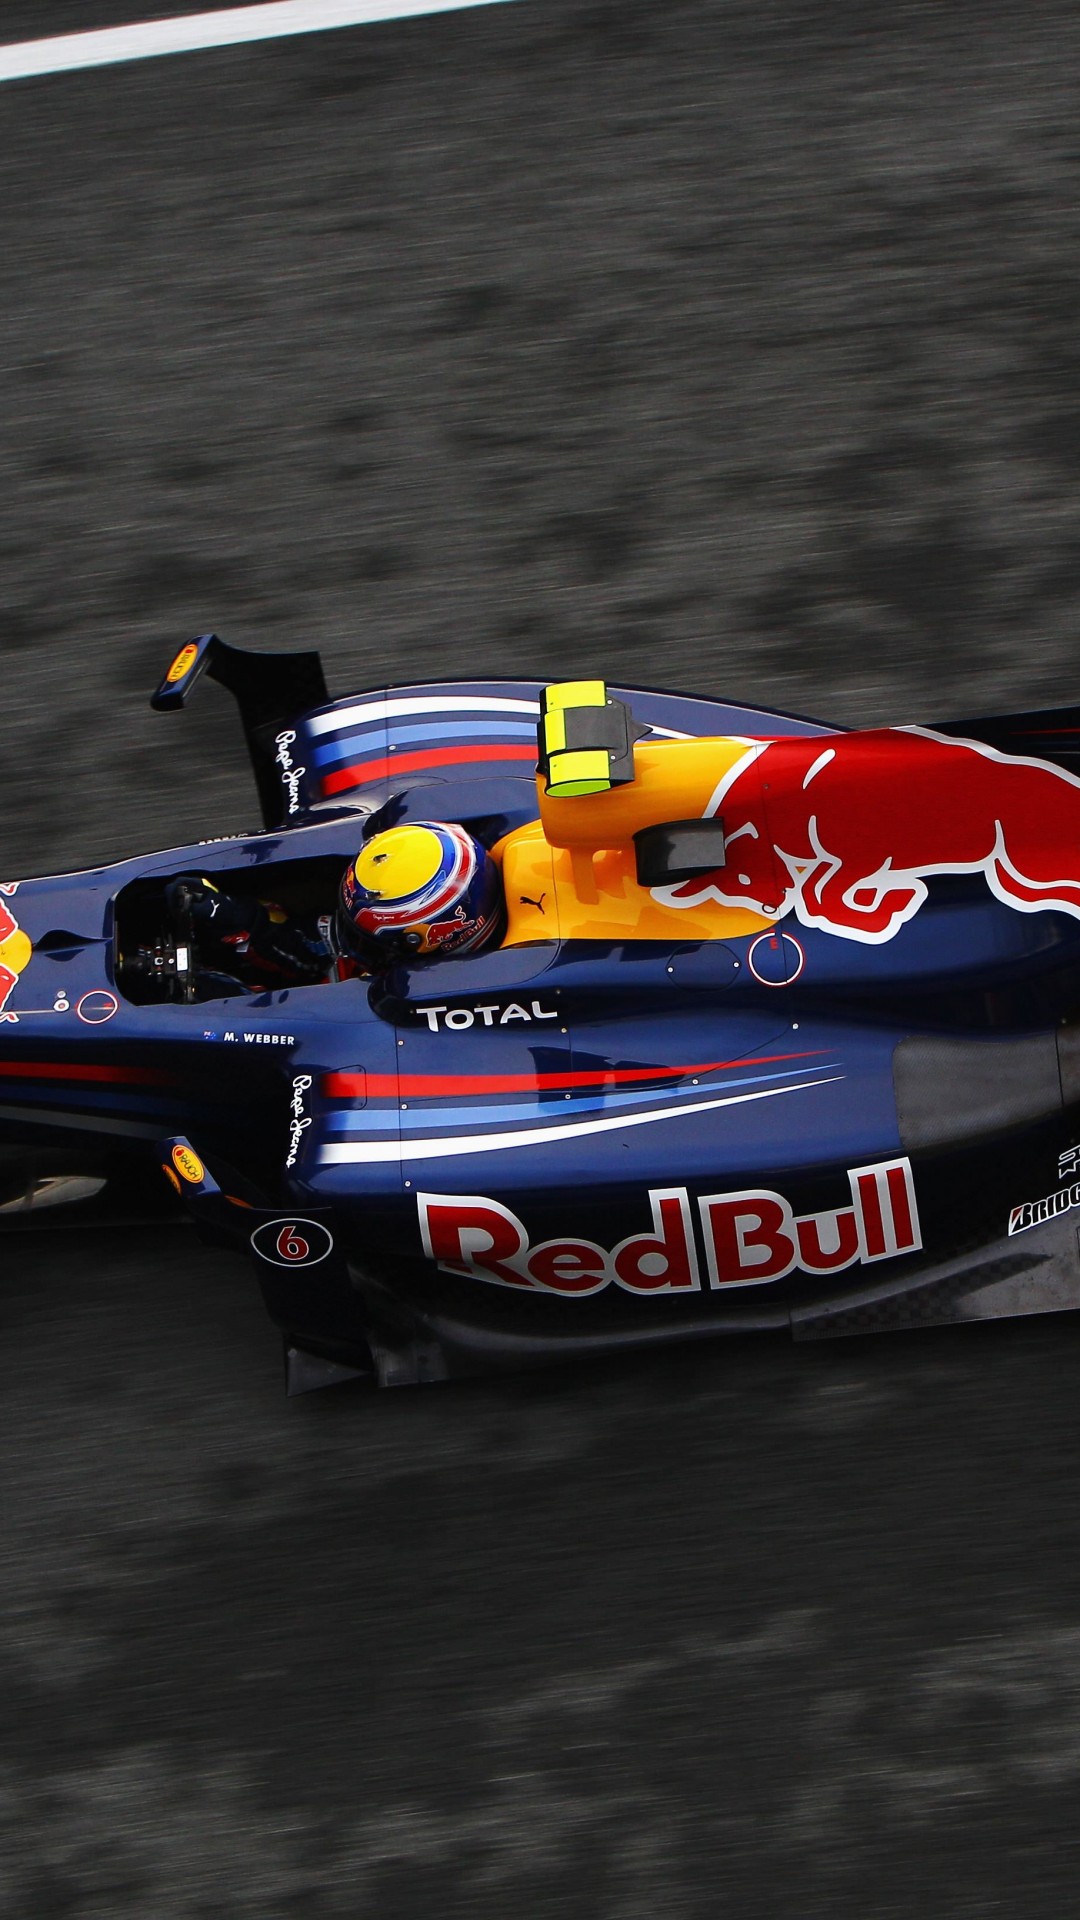 F1 Red Bull Team Wallpaper for HTC One